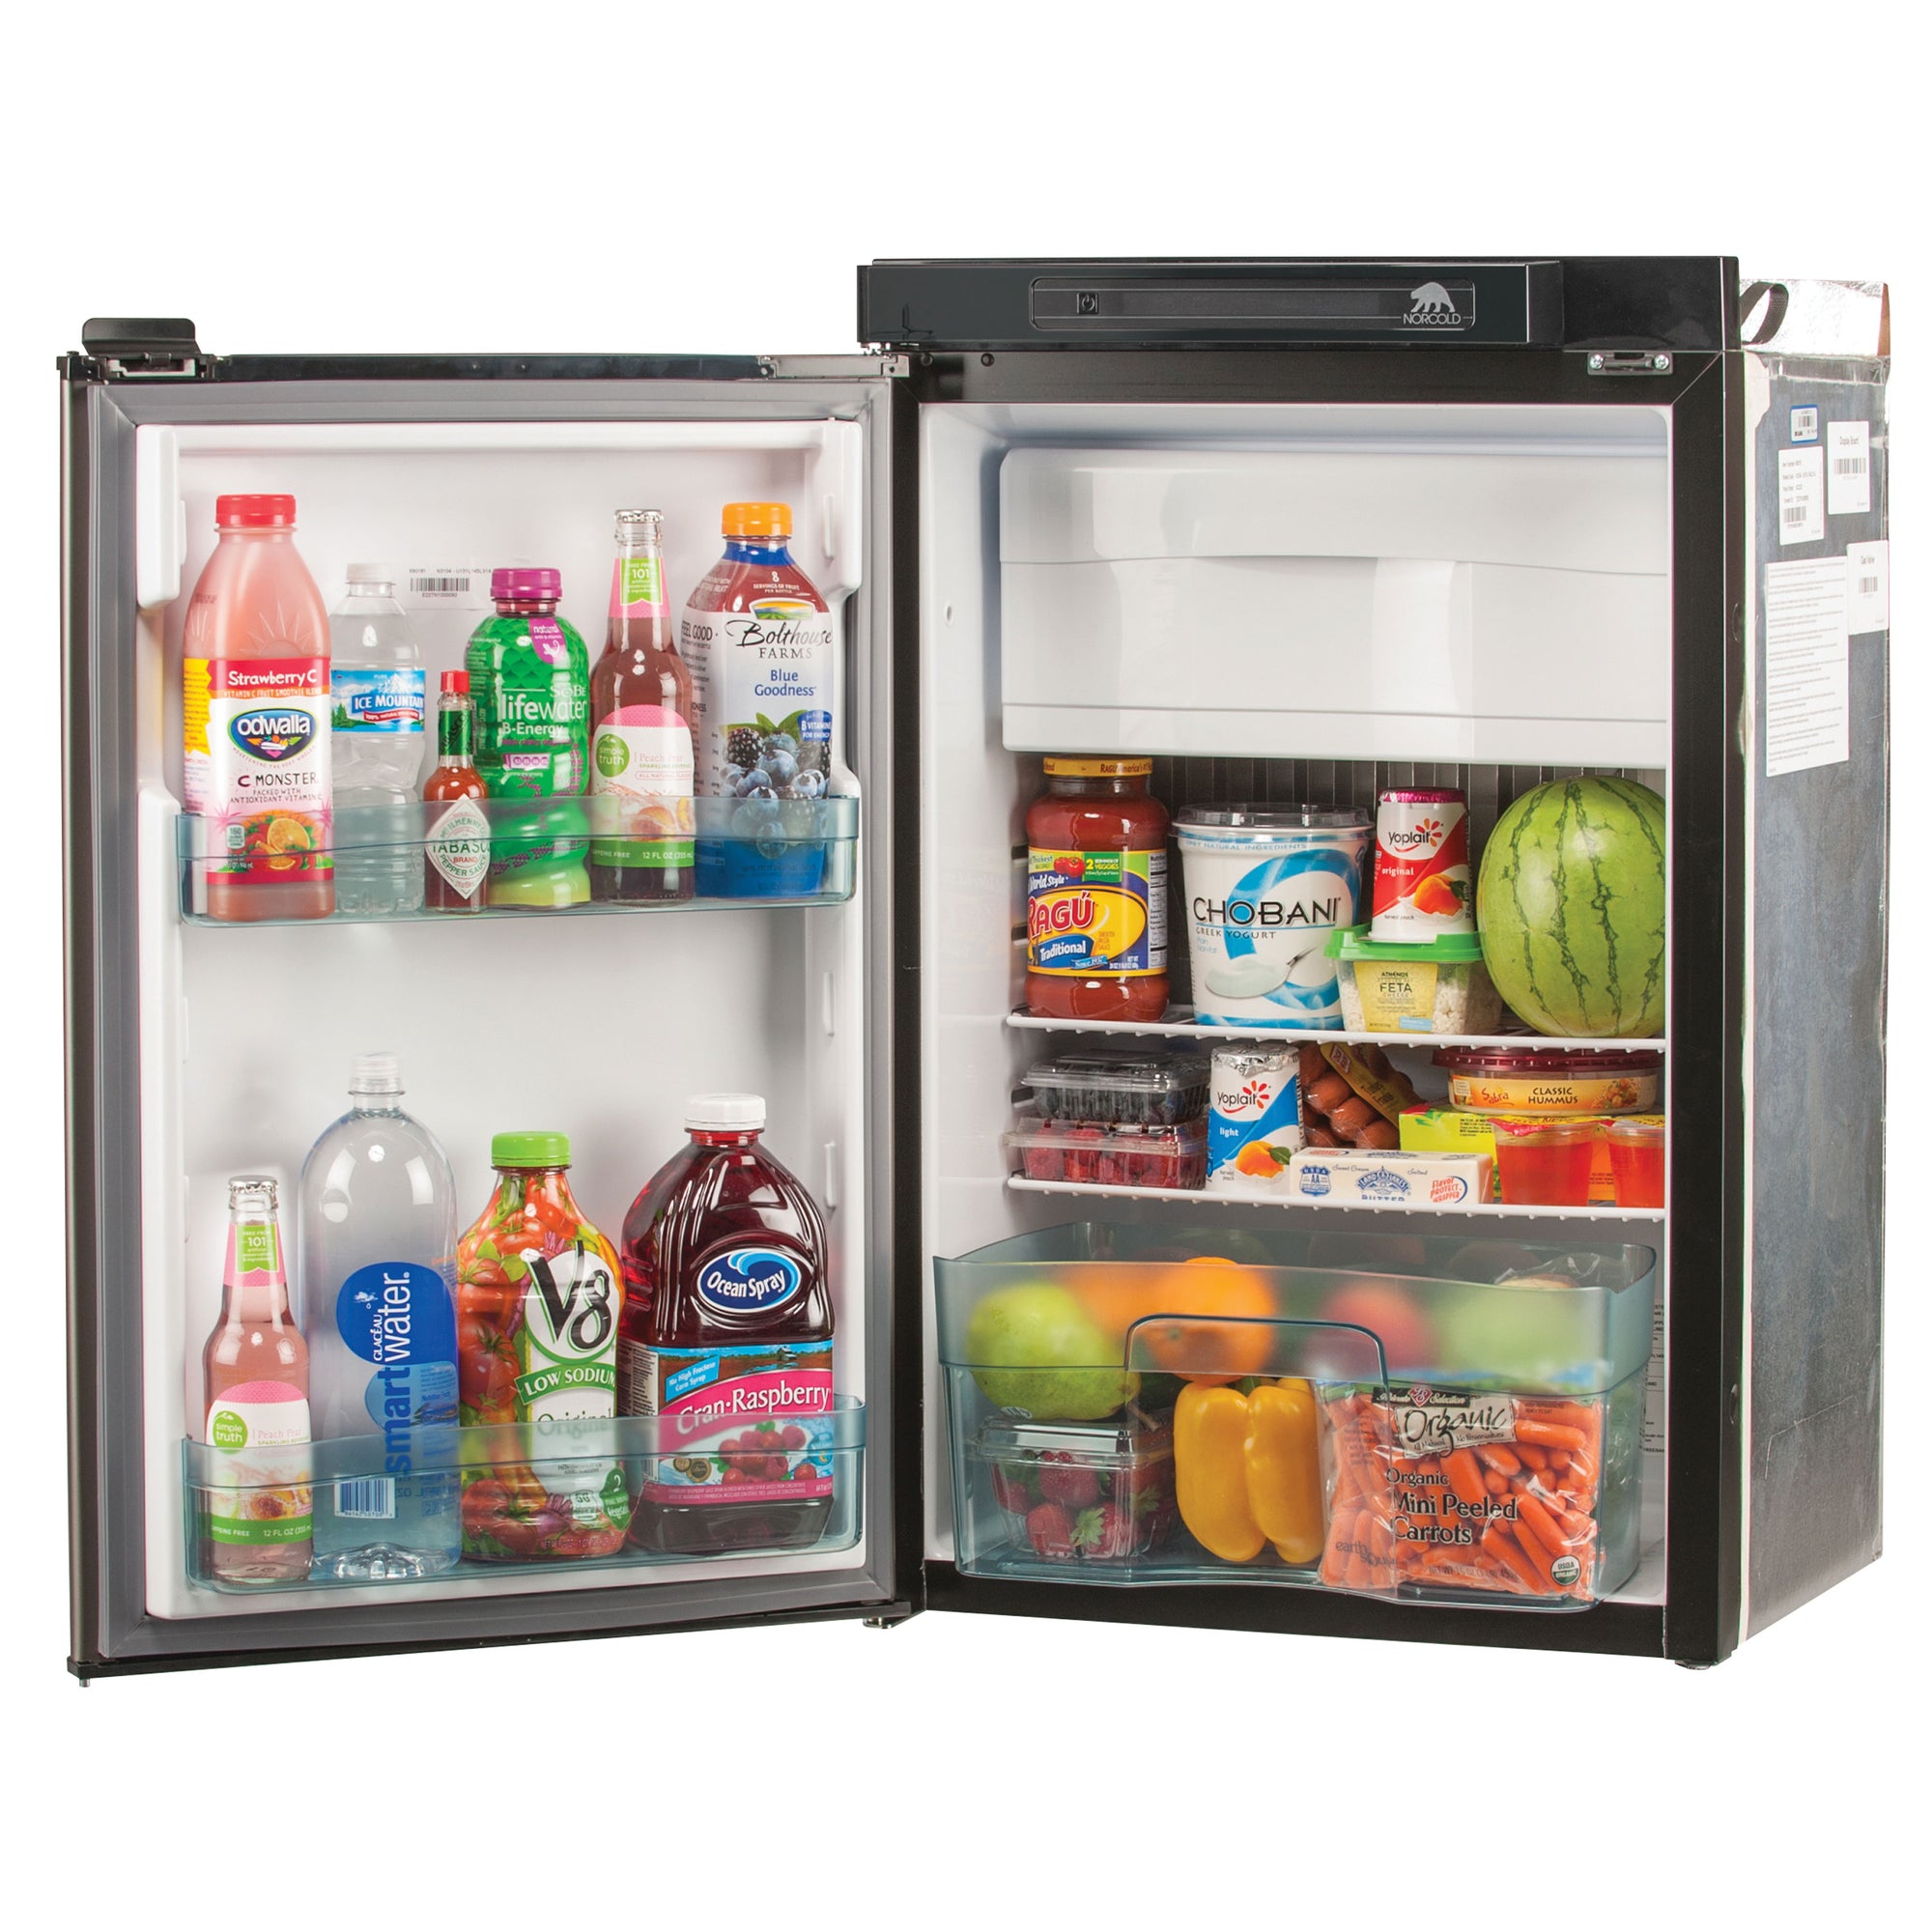 Norcold N3104AGR 2-Way Refrigerator - Freezer Compartment